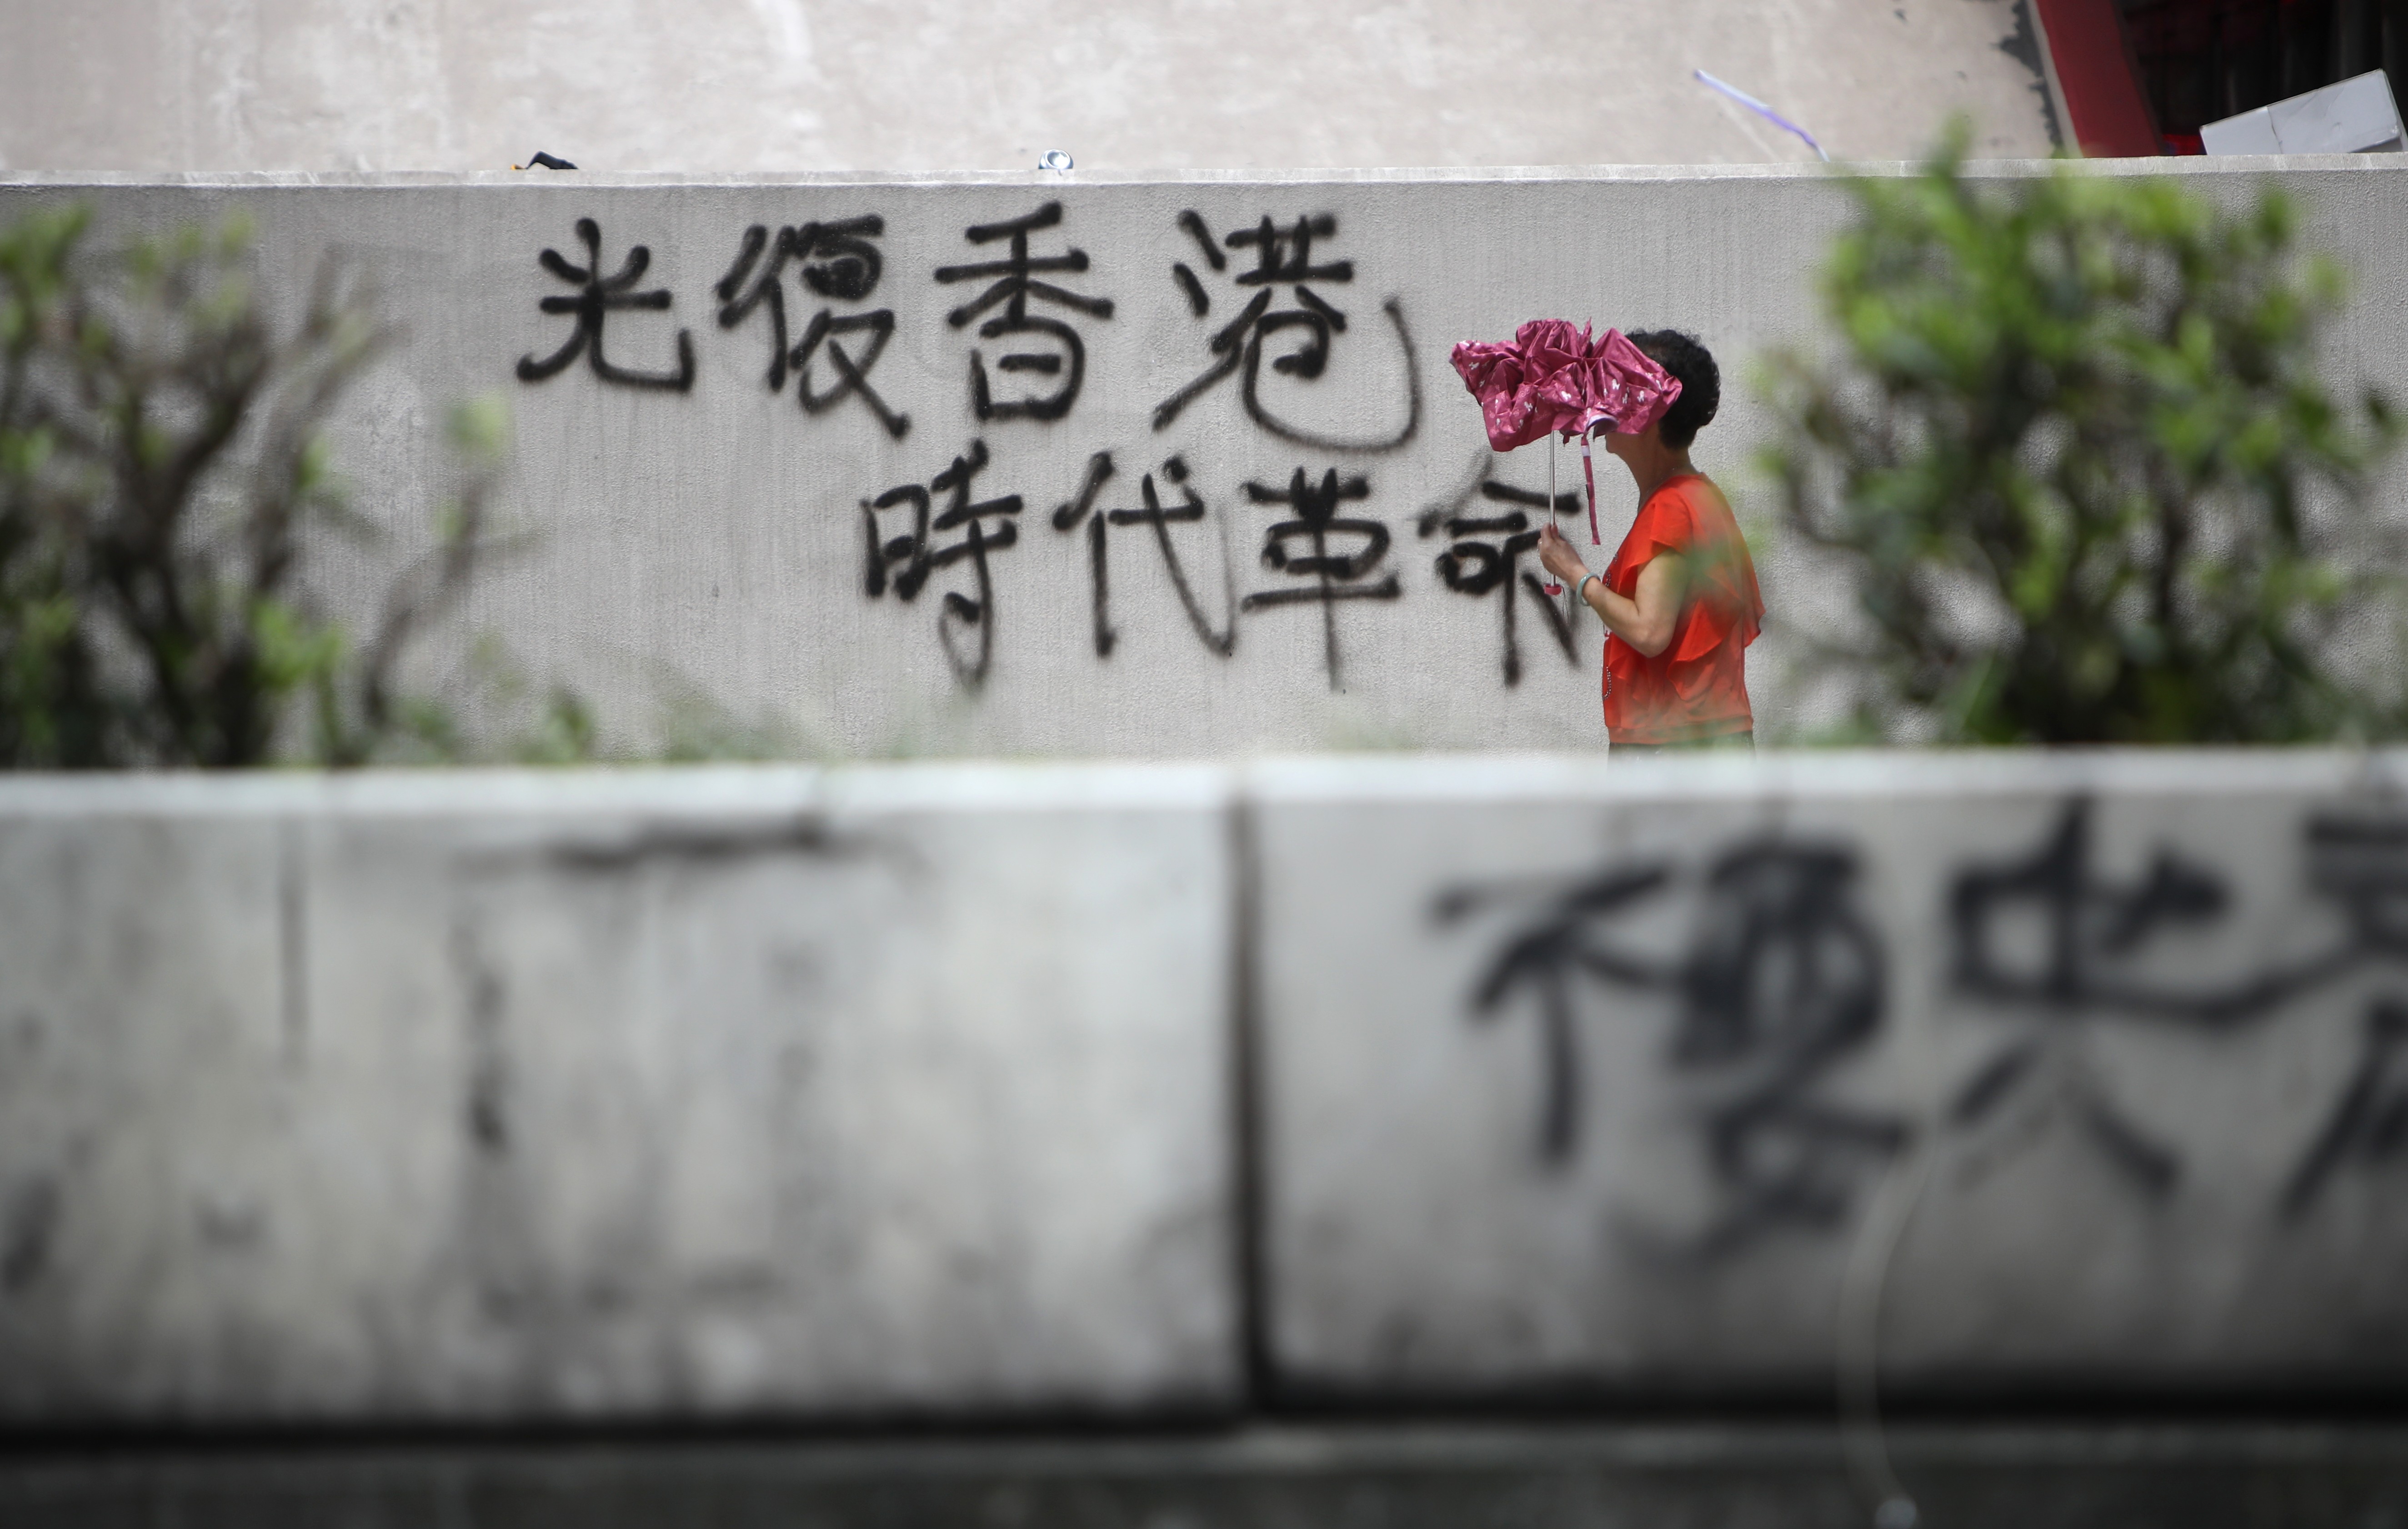 The protesters’ rallying cry of “Liberate Hong Kong; revolution of our times” is seen on August 6 spray-painted on a wall in Mong Kok. Photo: Winson Wong